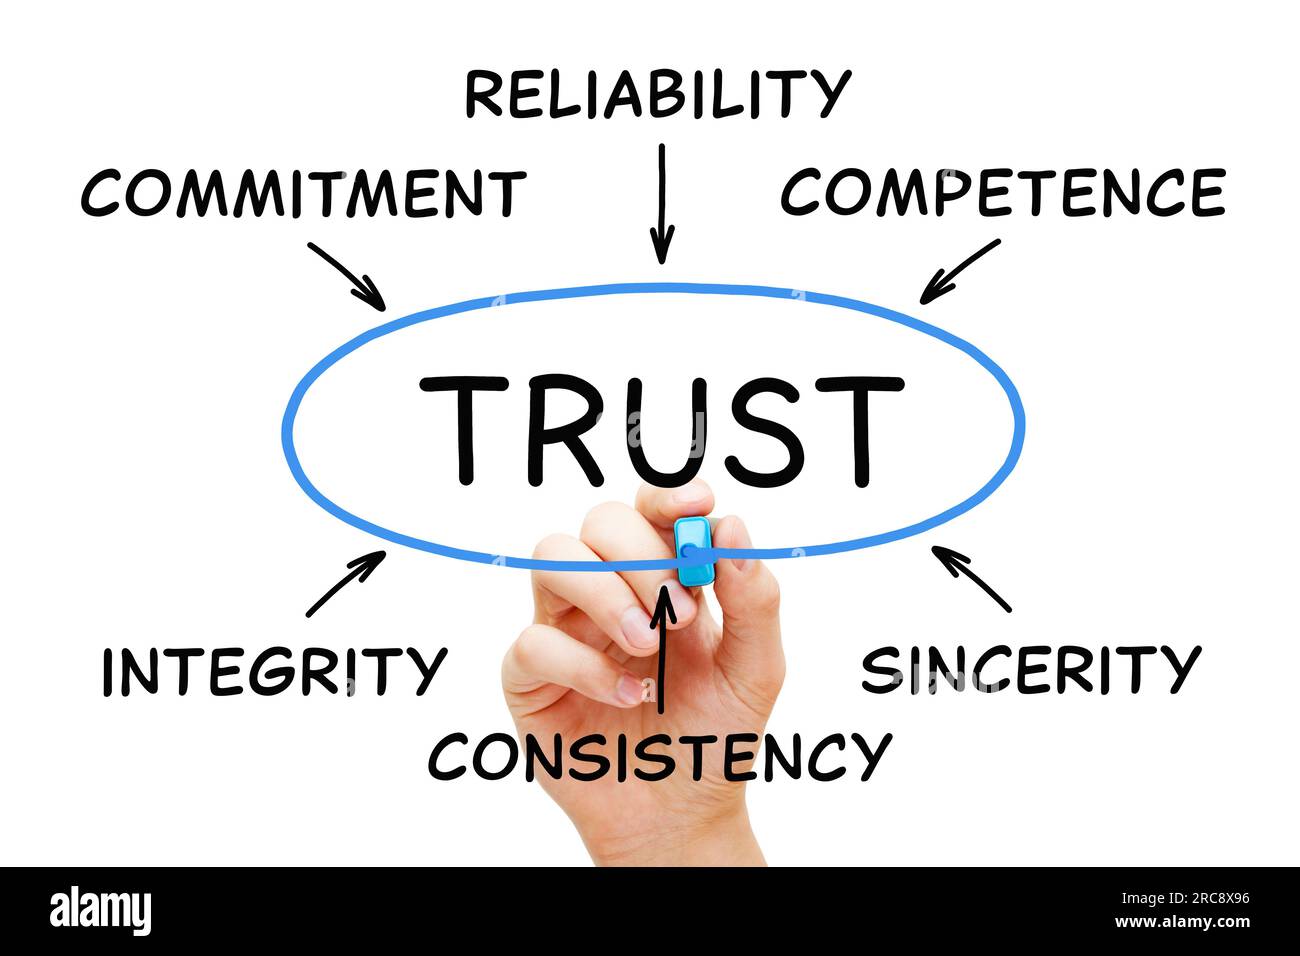 Hand writing diagram concept about Trust in business with related words reliability, integrity, competence, sincerity, commitment and consistency. Stock Photo